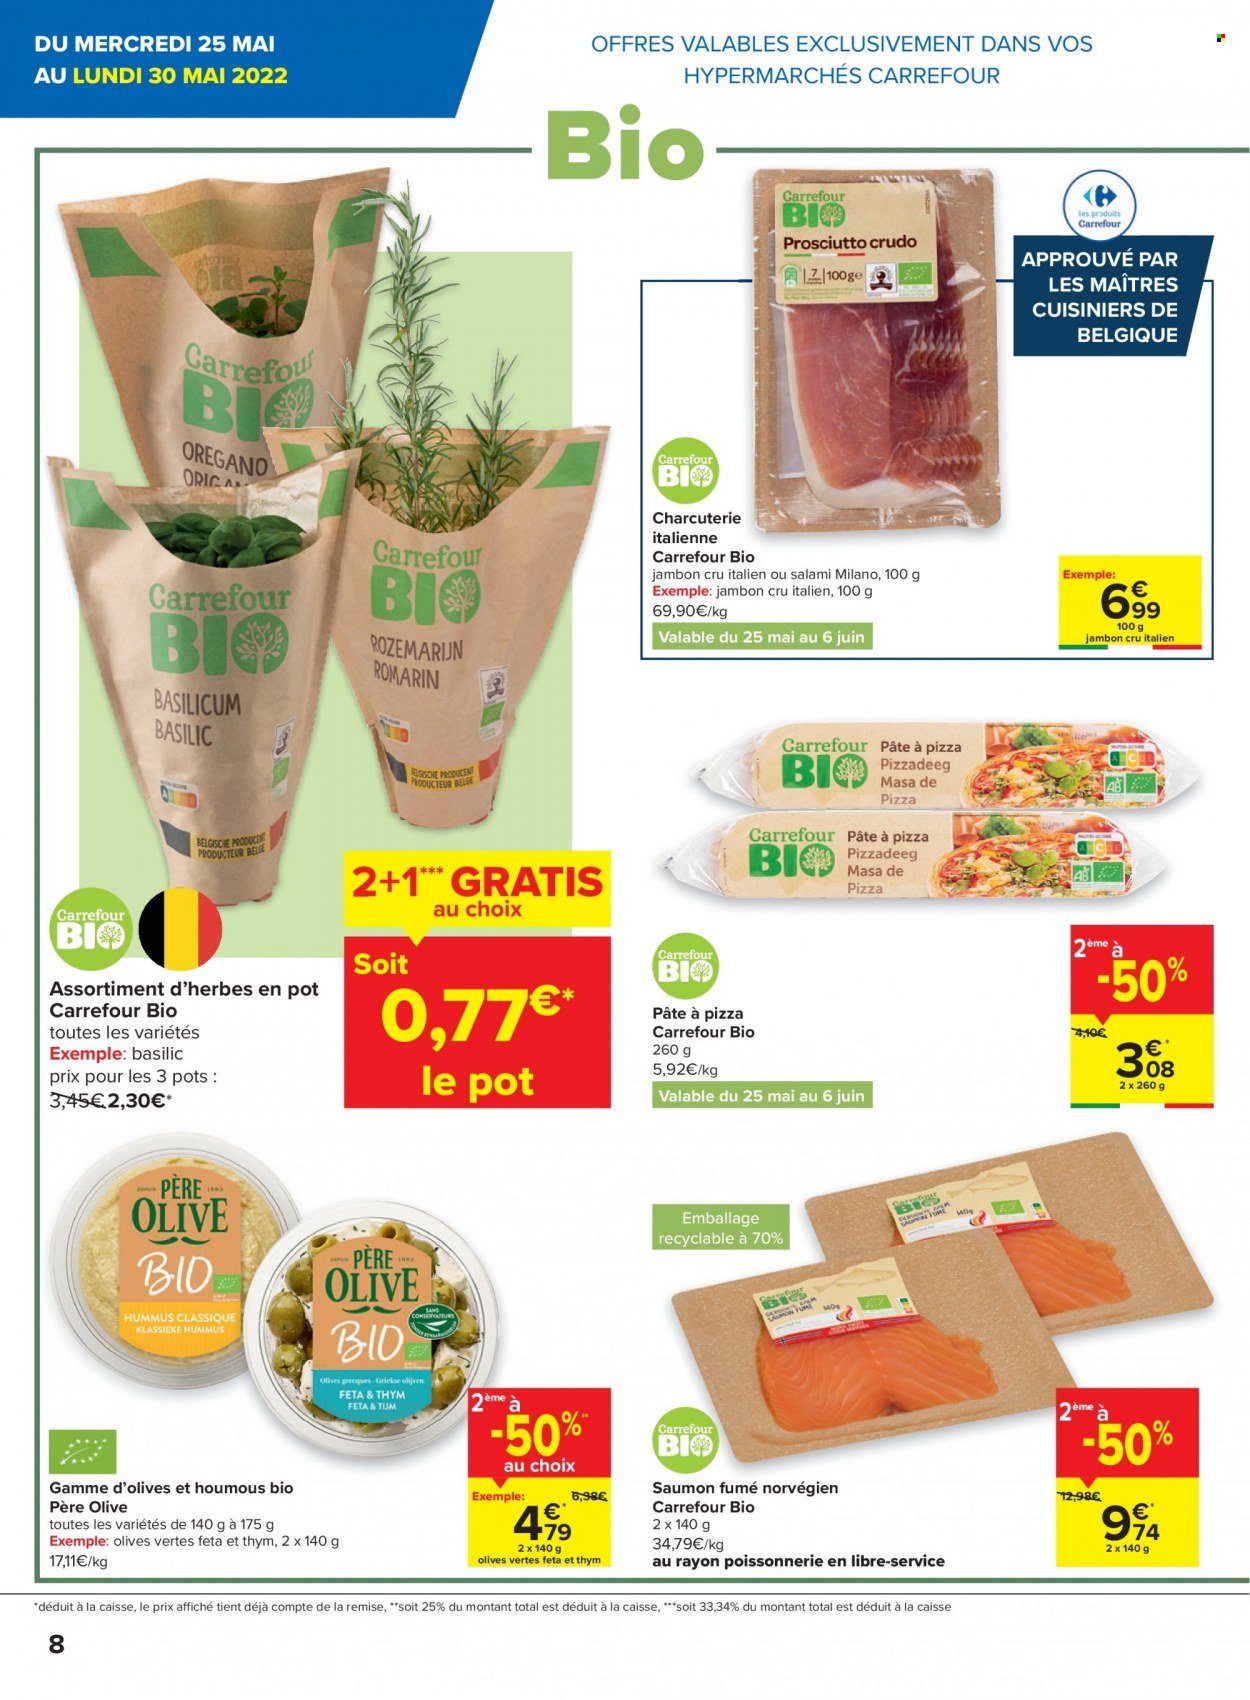 Catalogue Carrefour hypermarkt - 25.5.2022 - 31.5.2022. Page 8.